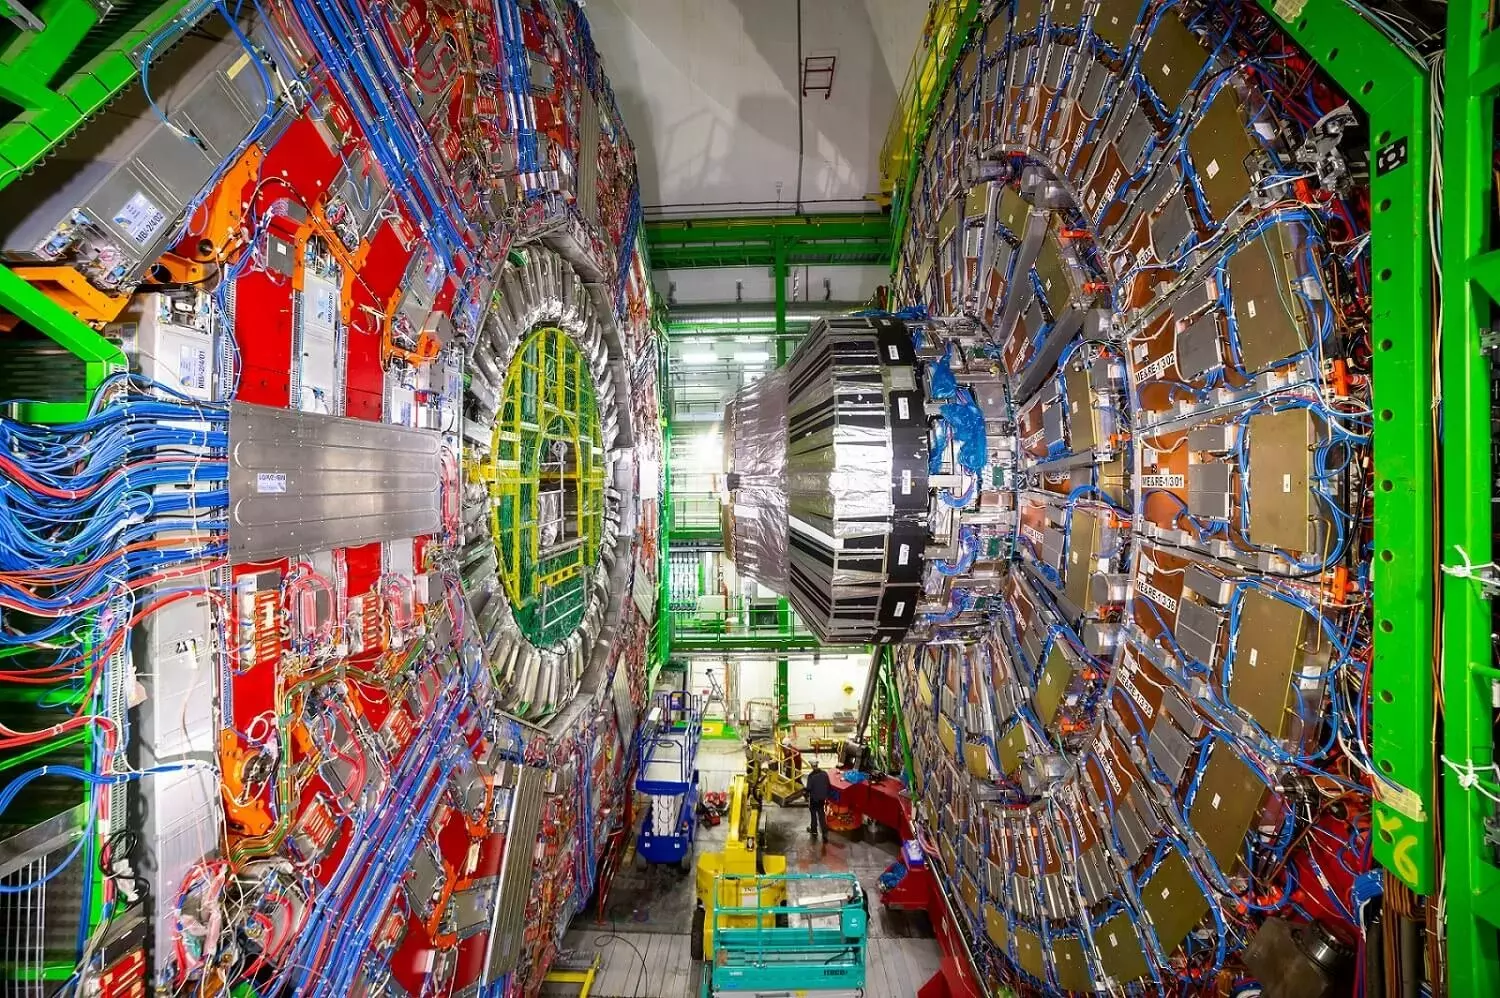 How Long Will Cern Be On